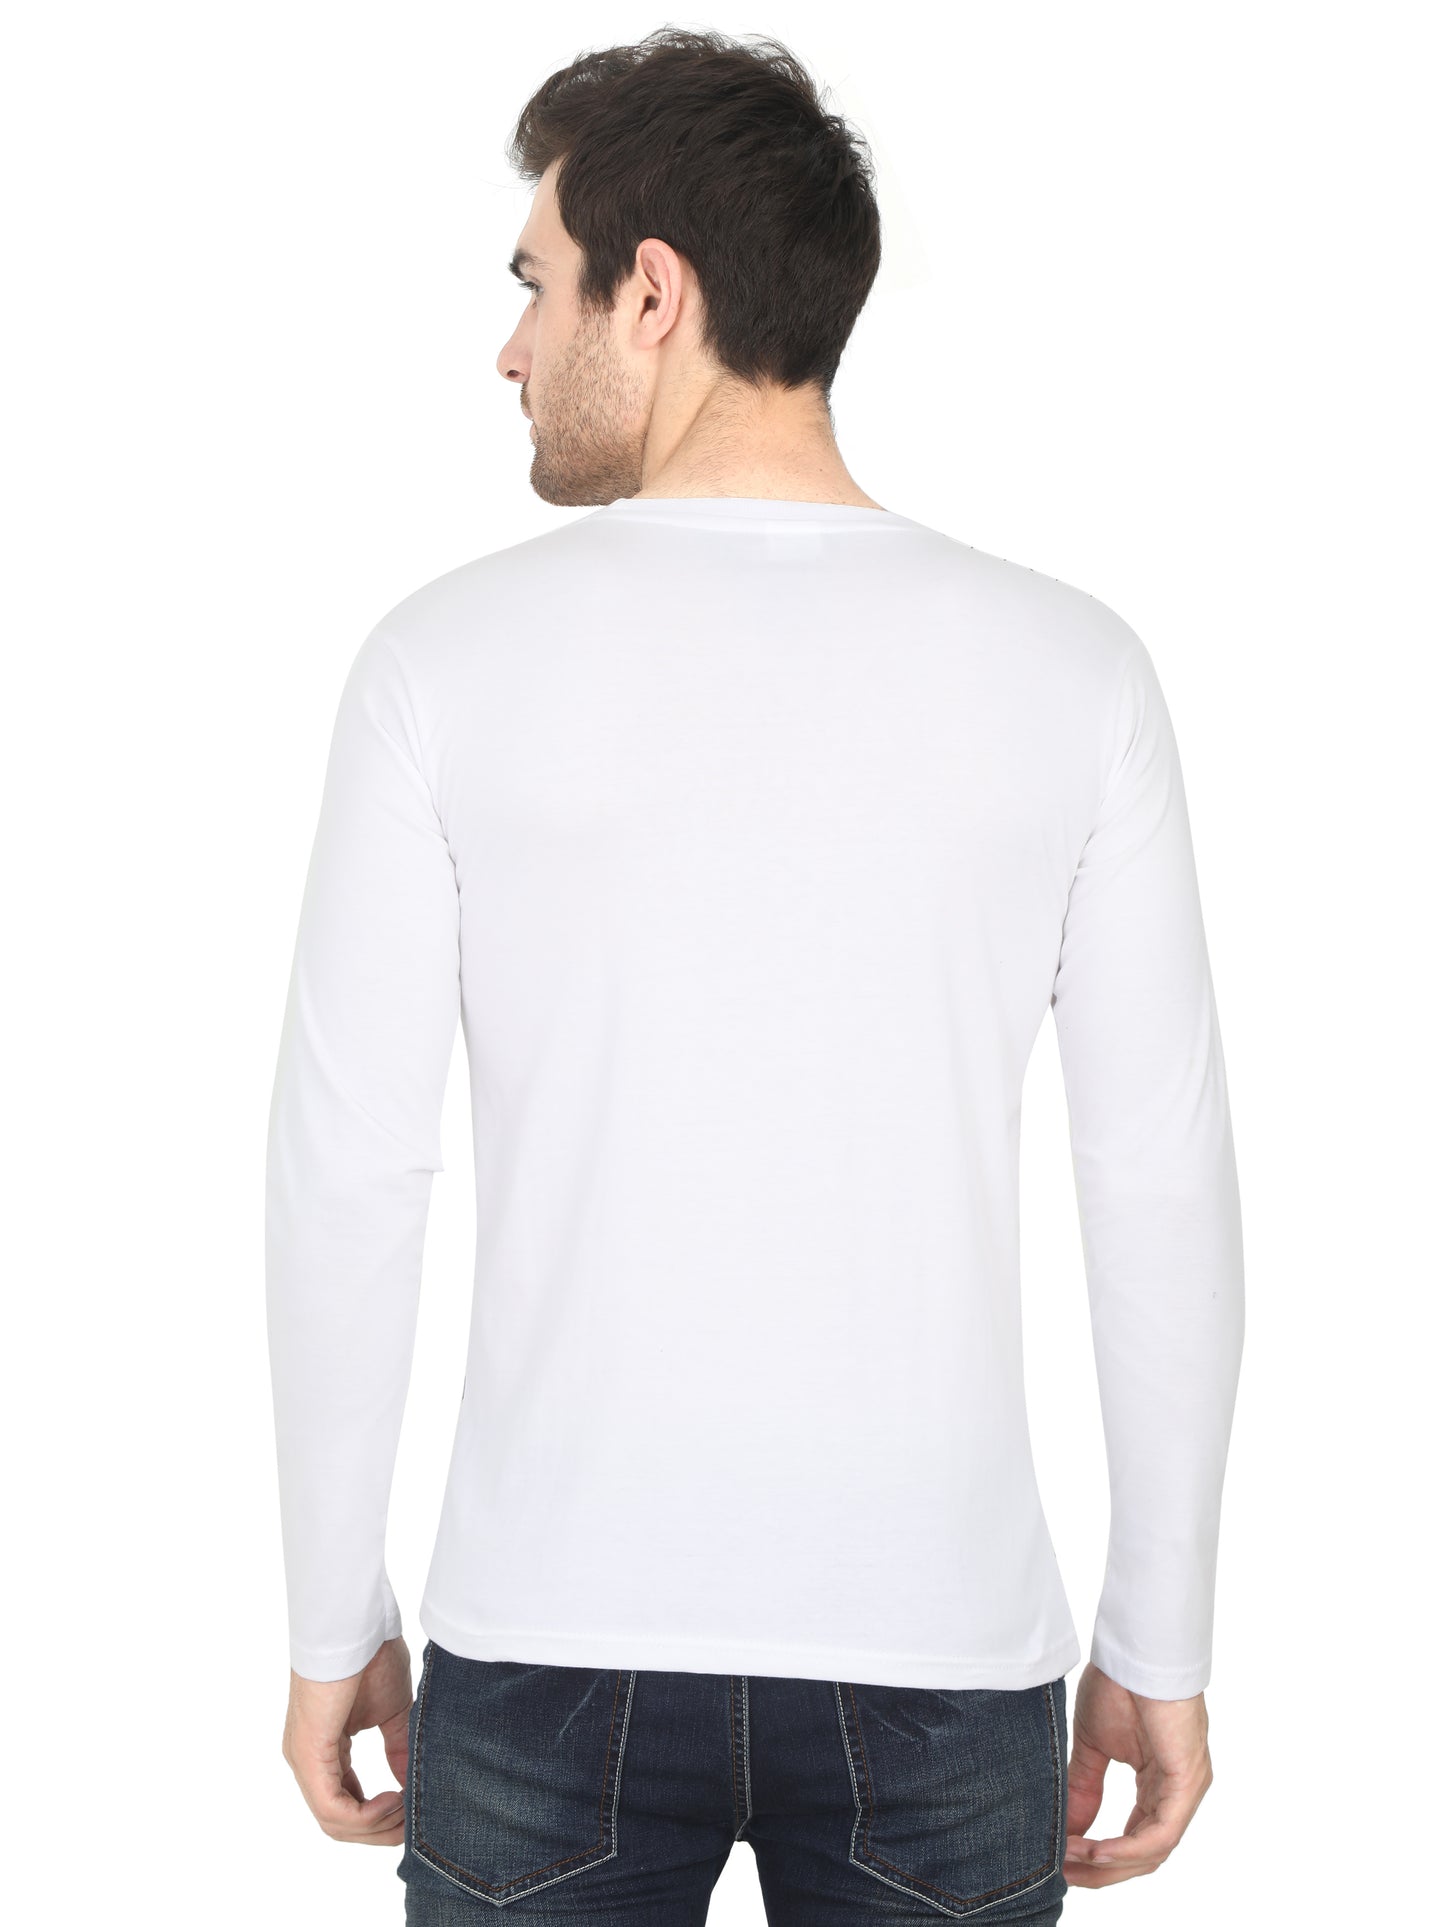 Men's Cotton Round Neck Full Sleeve All Over Printed T-Shirt